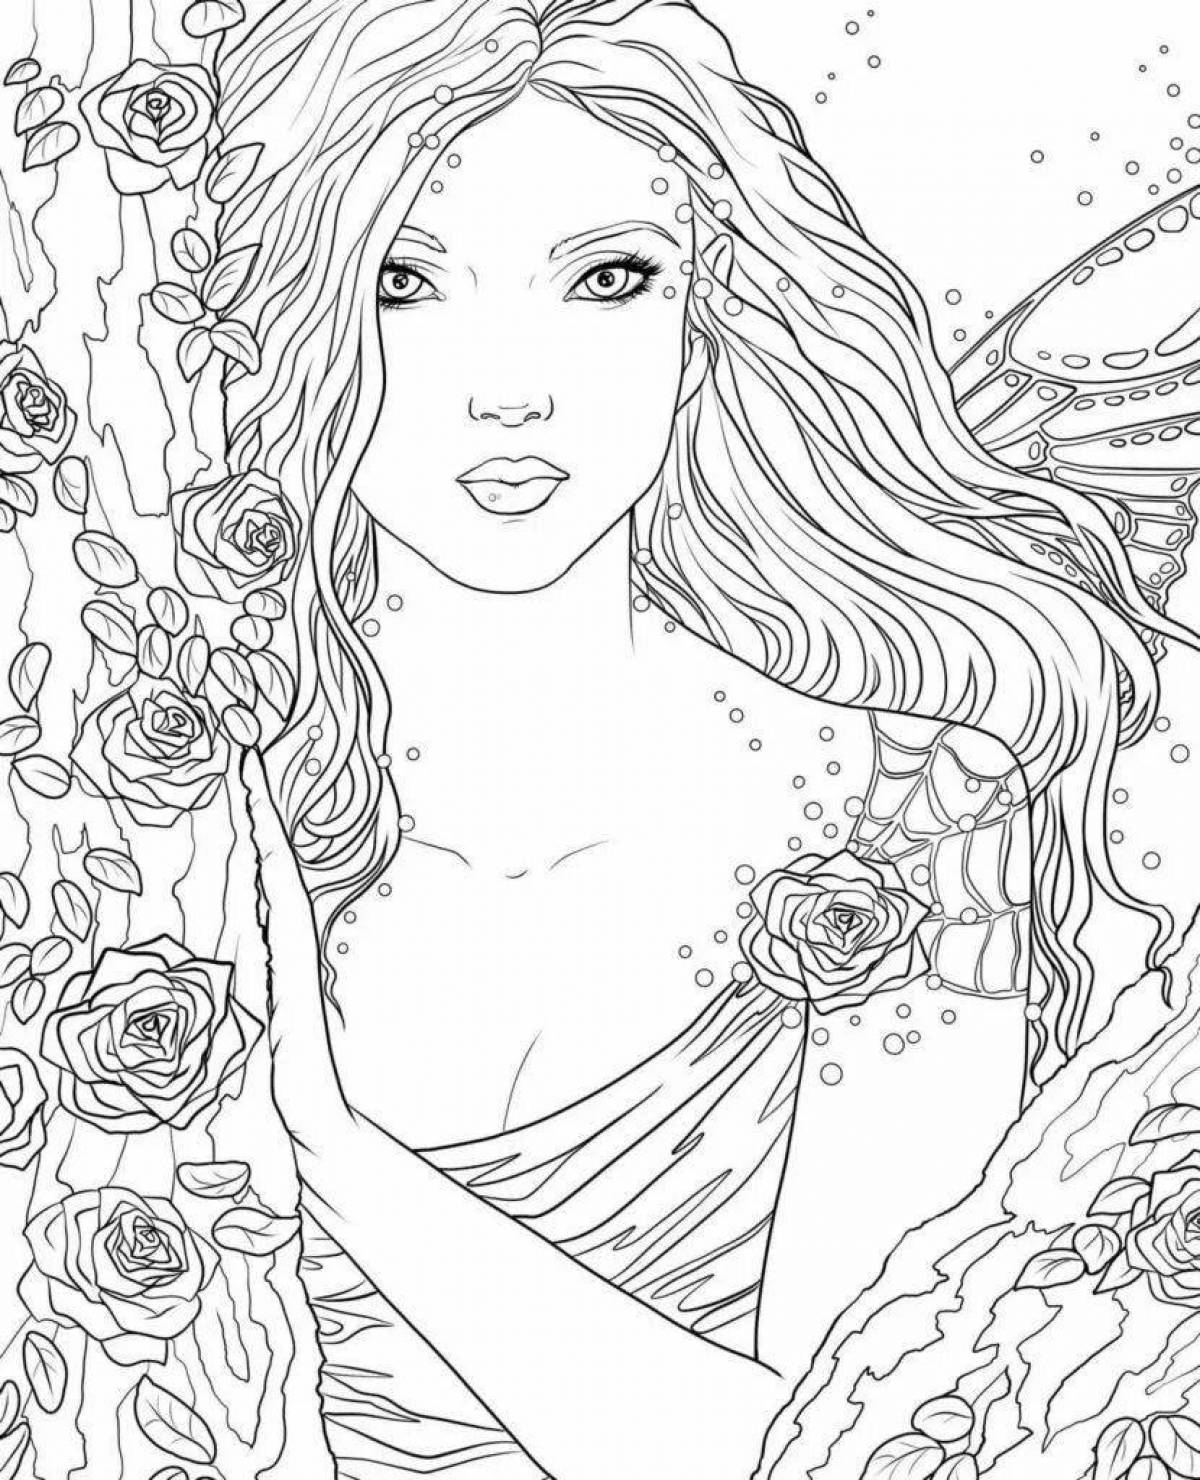 Fancy coloring for girls